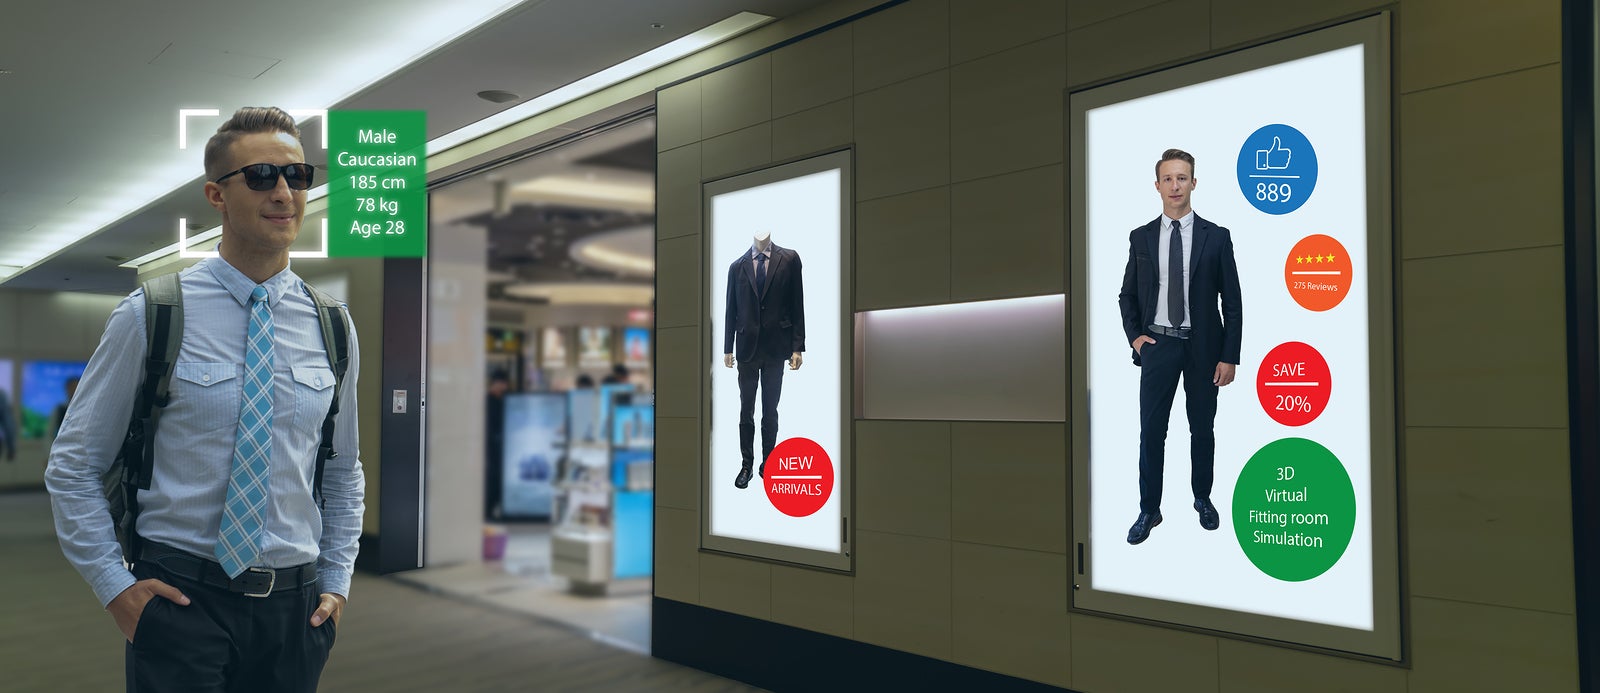 Small Businesses Can Get Big Results With Digital Signage